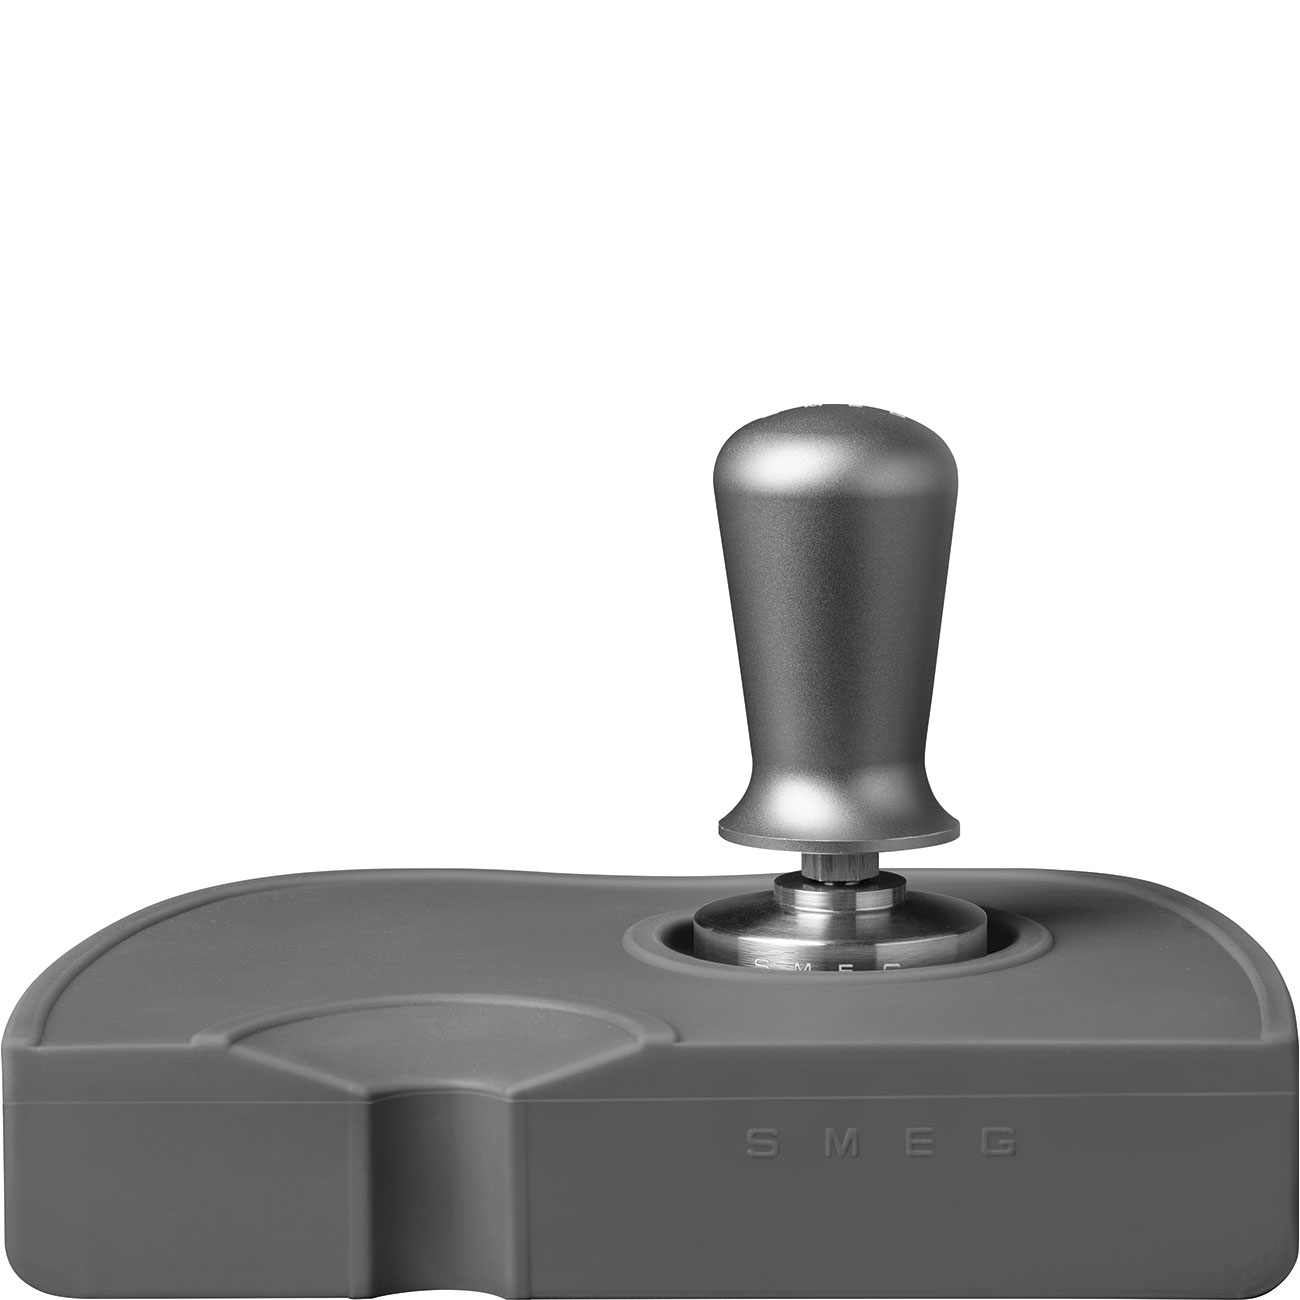 Coffee tamper accessory for Smeg Coffee machines - ECTS01_1